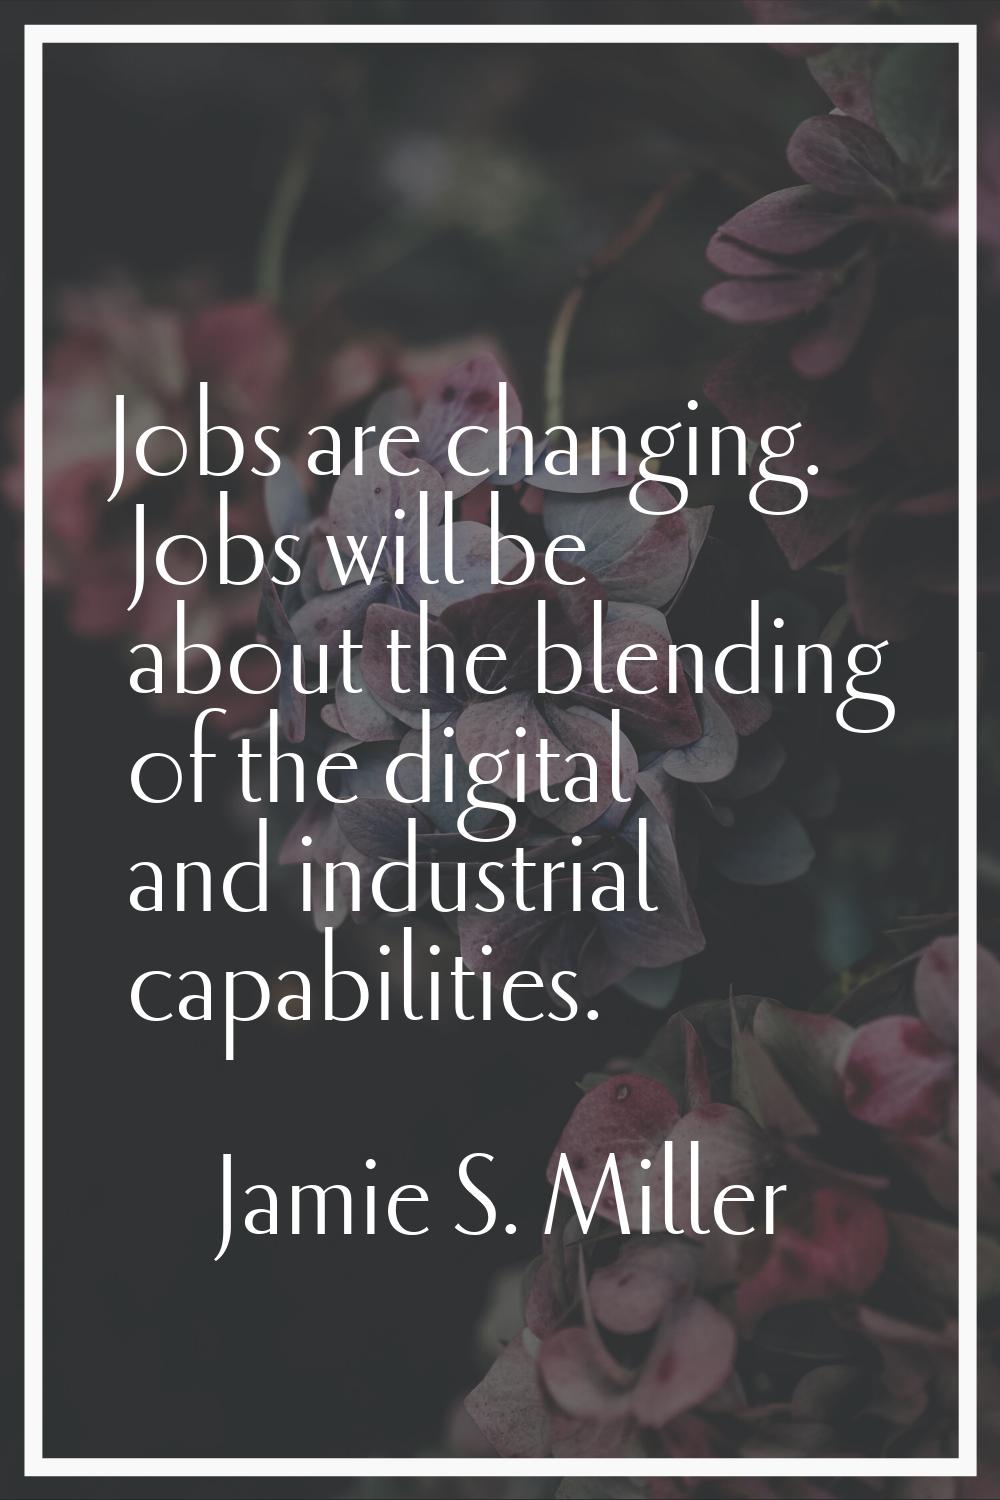 Jobs are changing. Jobs will be about the blending of the digital and industrial capabilities.